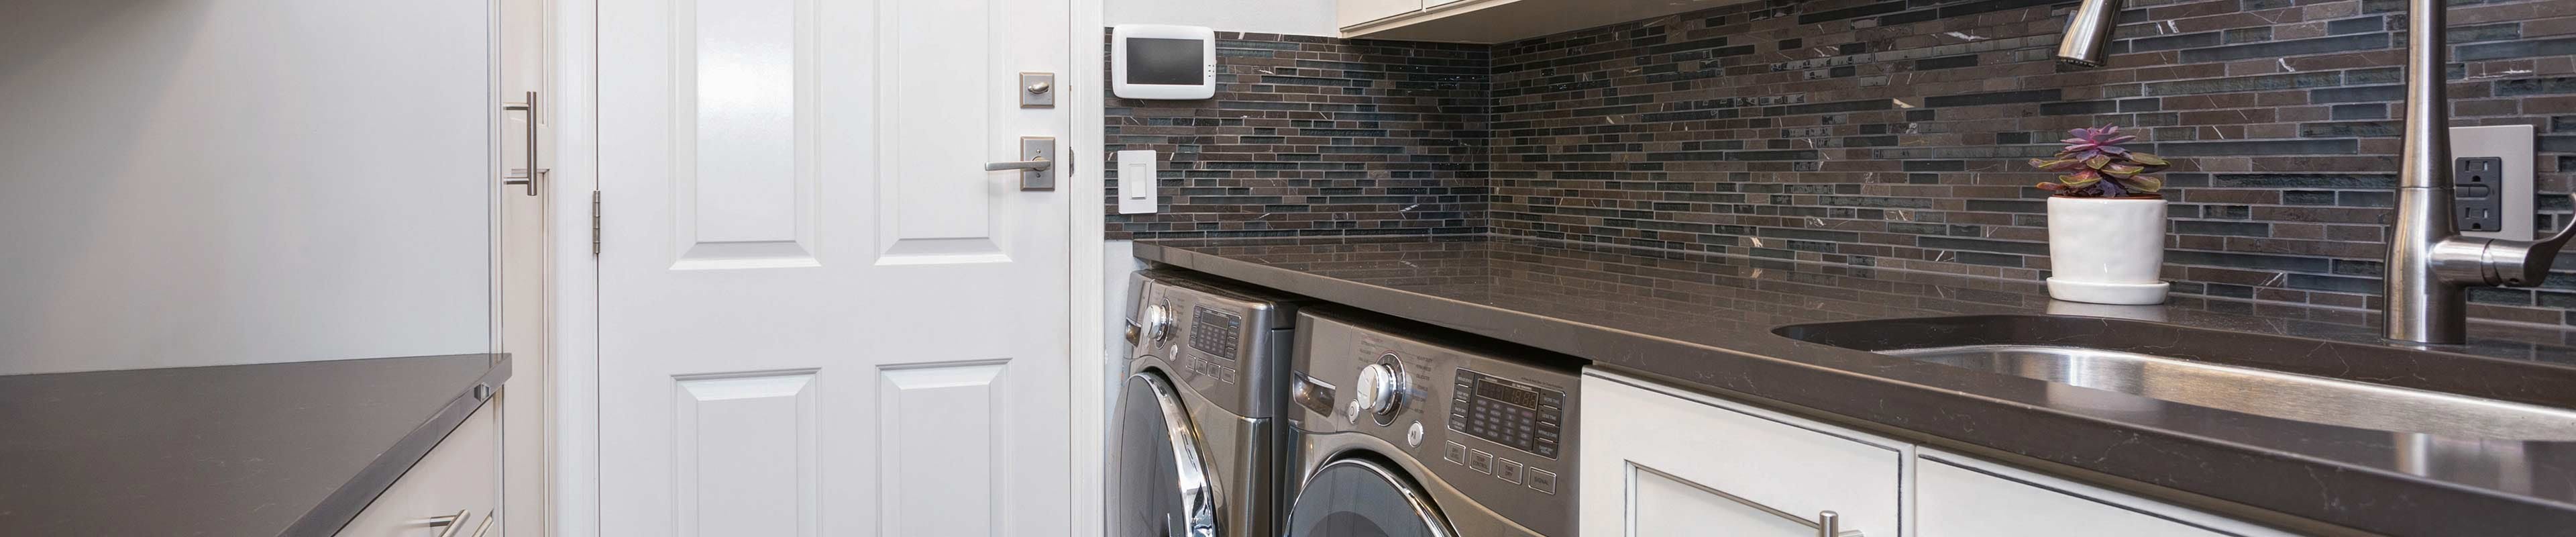 Image of an in-unit washer and dryer in a rental home.